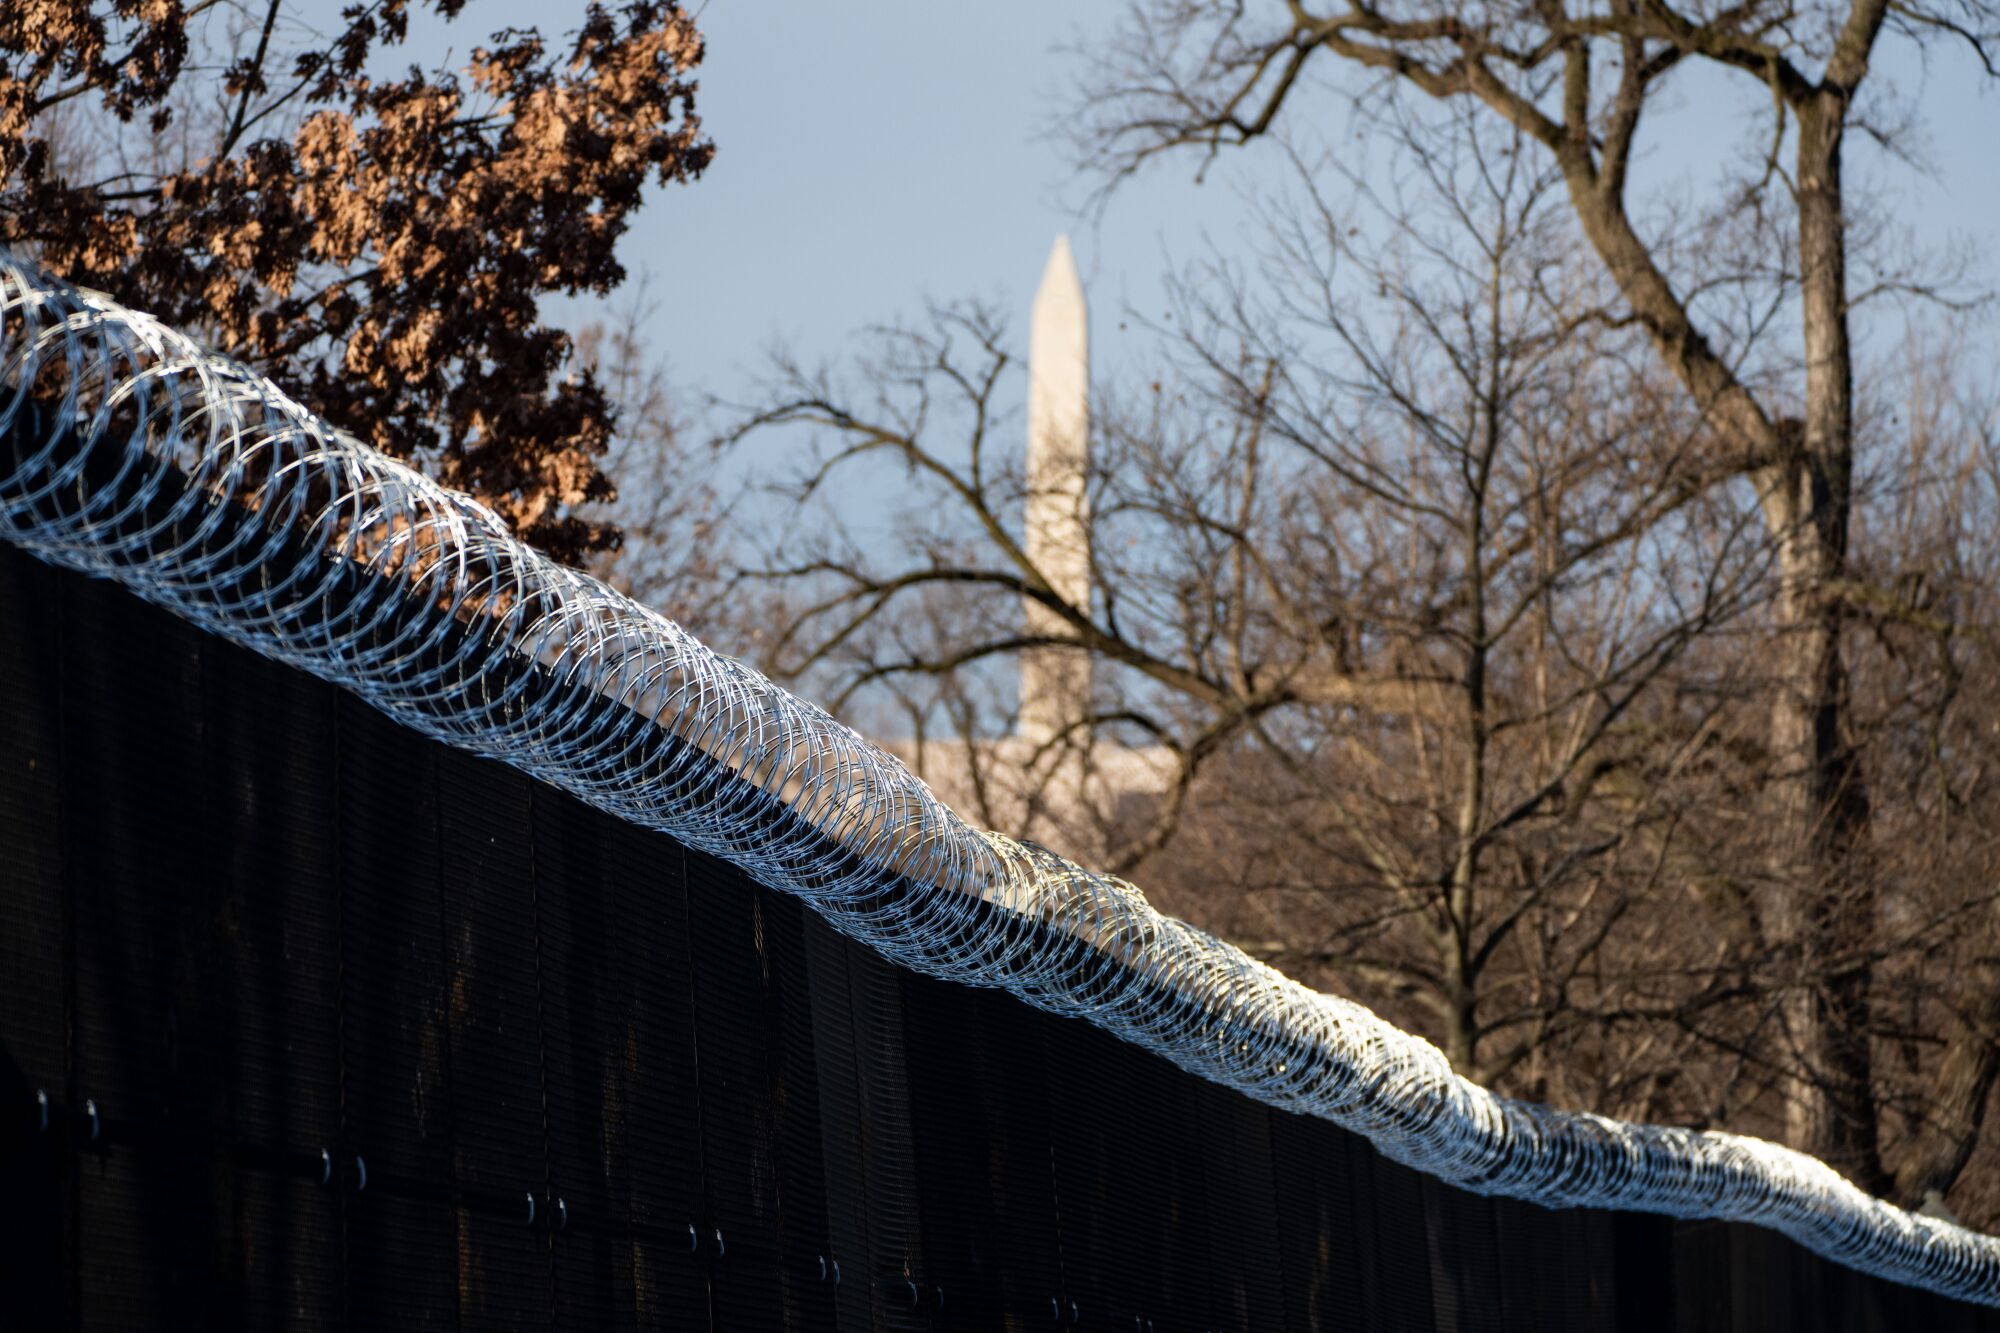 Barbed wire has been installed around the U.S. Capitol grounds. The Washington Monument rises in the distance.